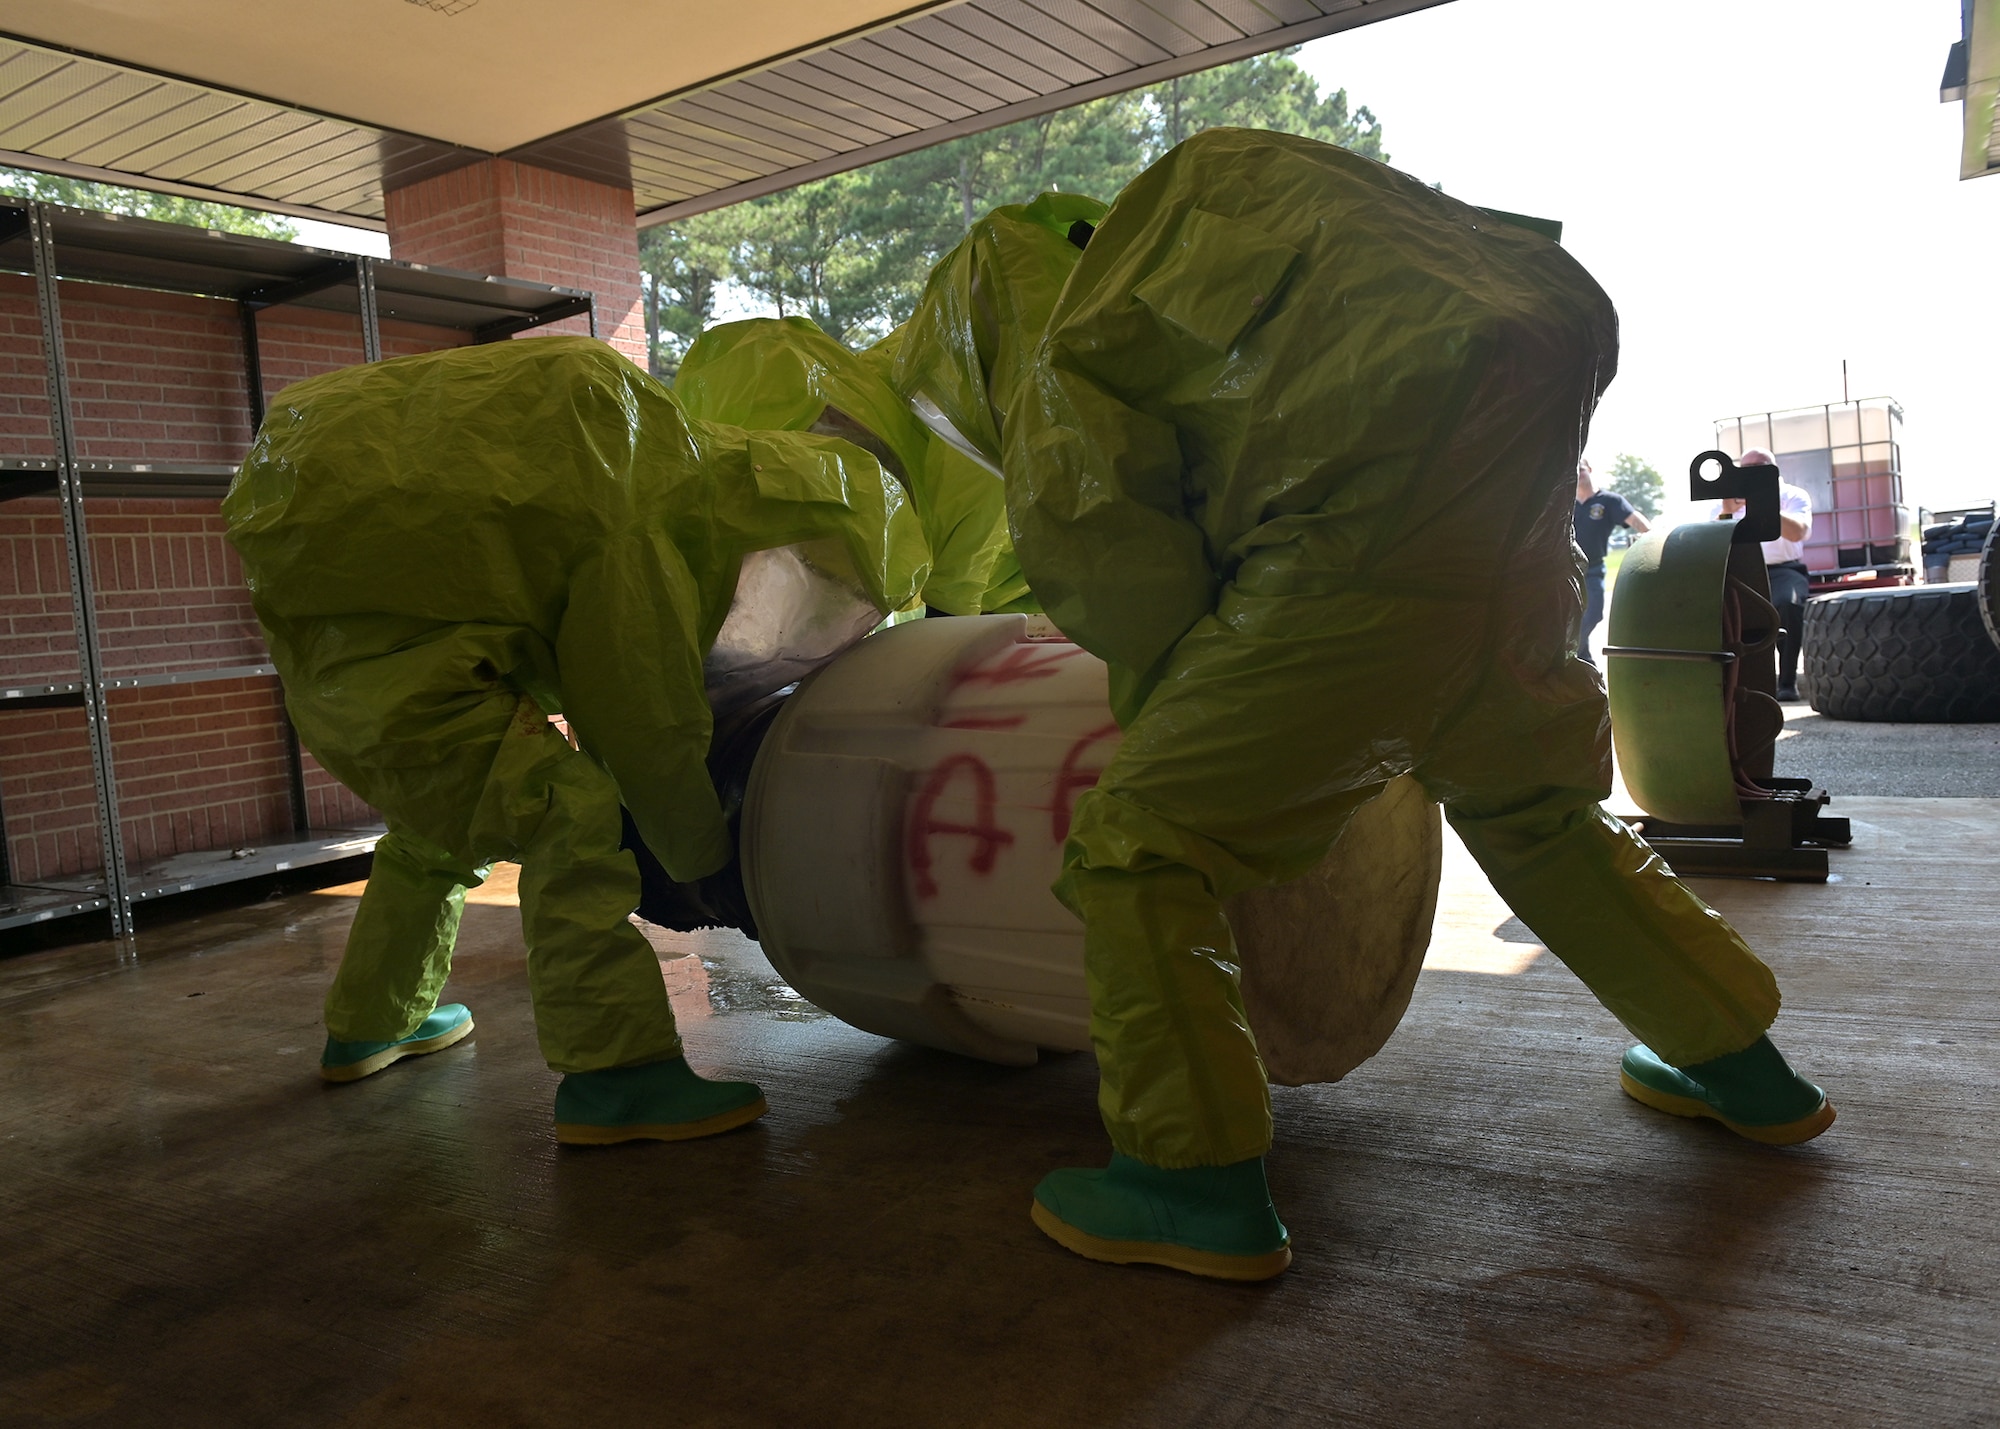 Firefighters contain a simulated hazardous materials spill.